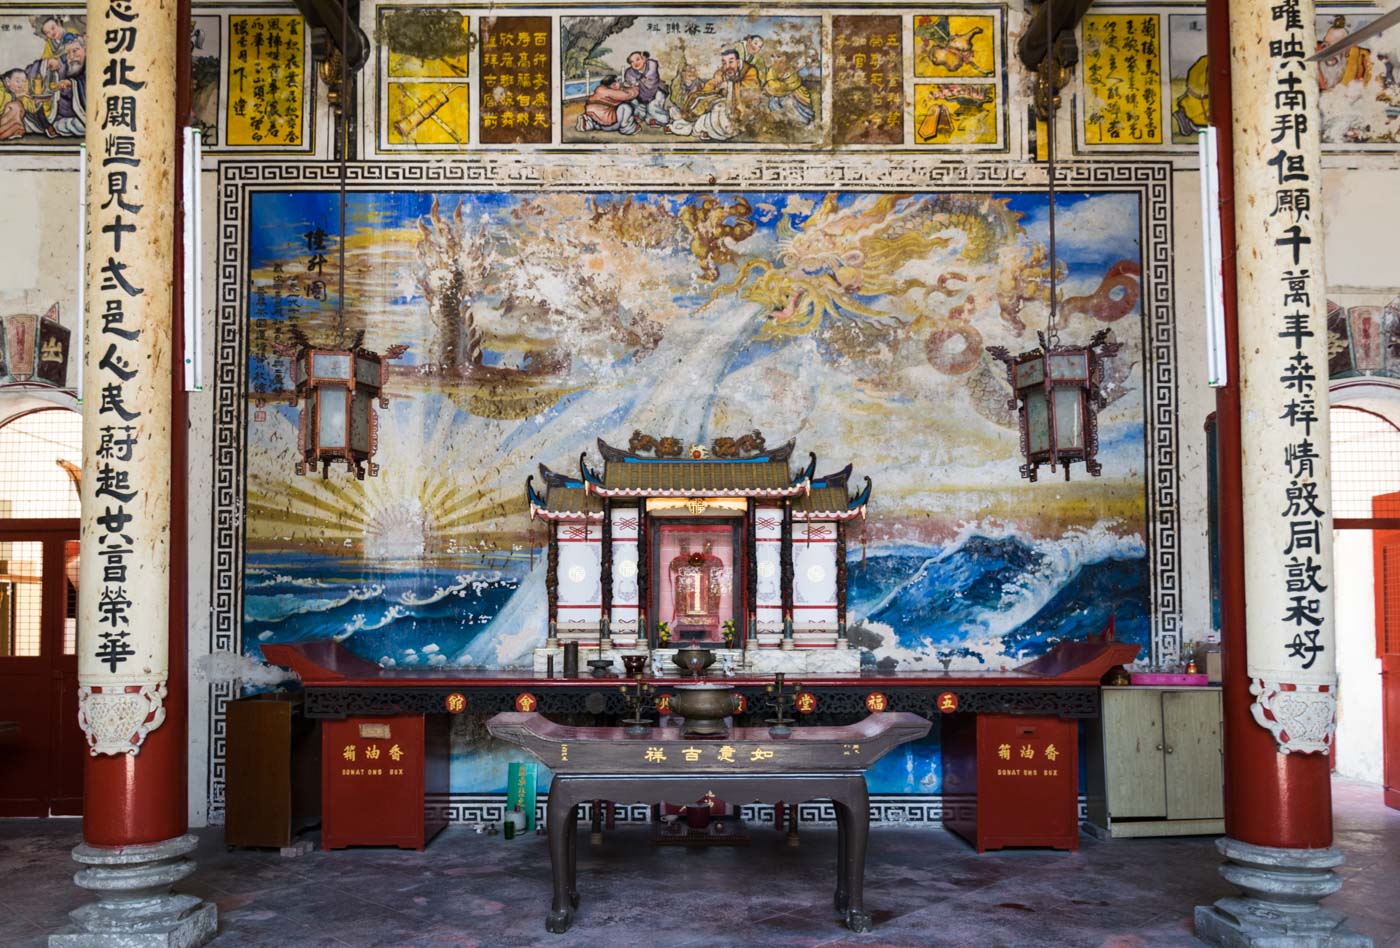 Inside a painted wall temple